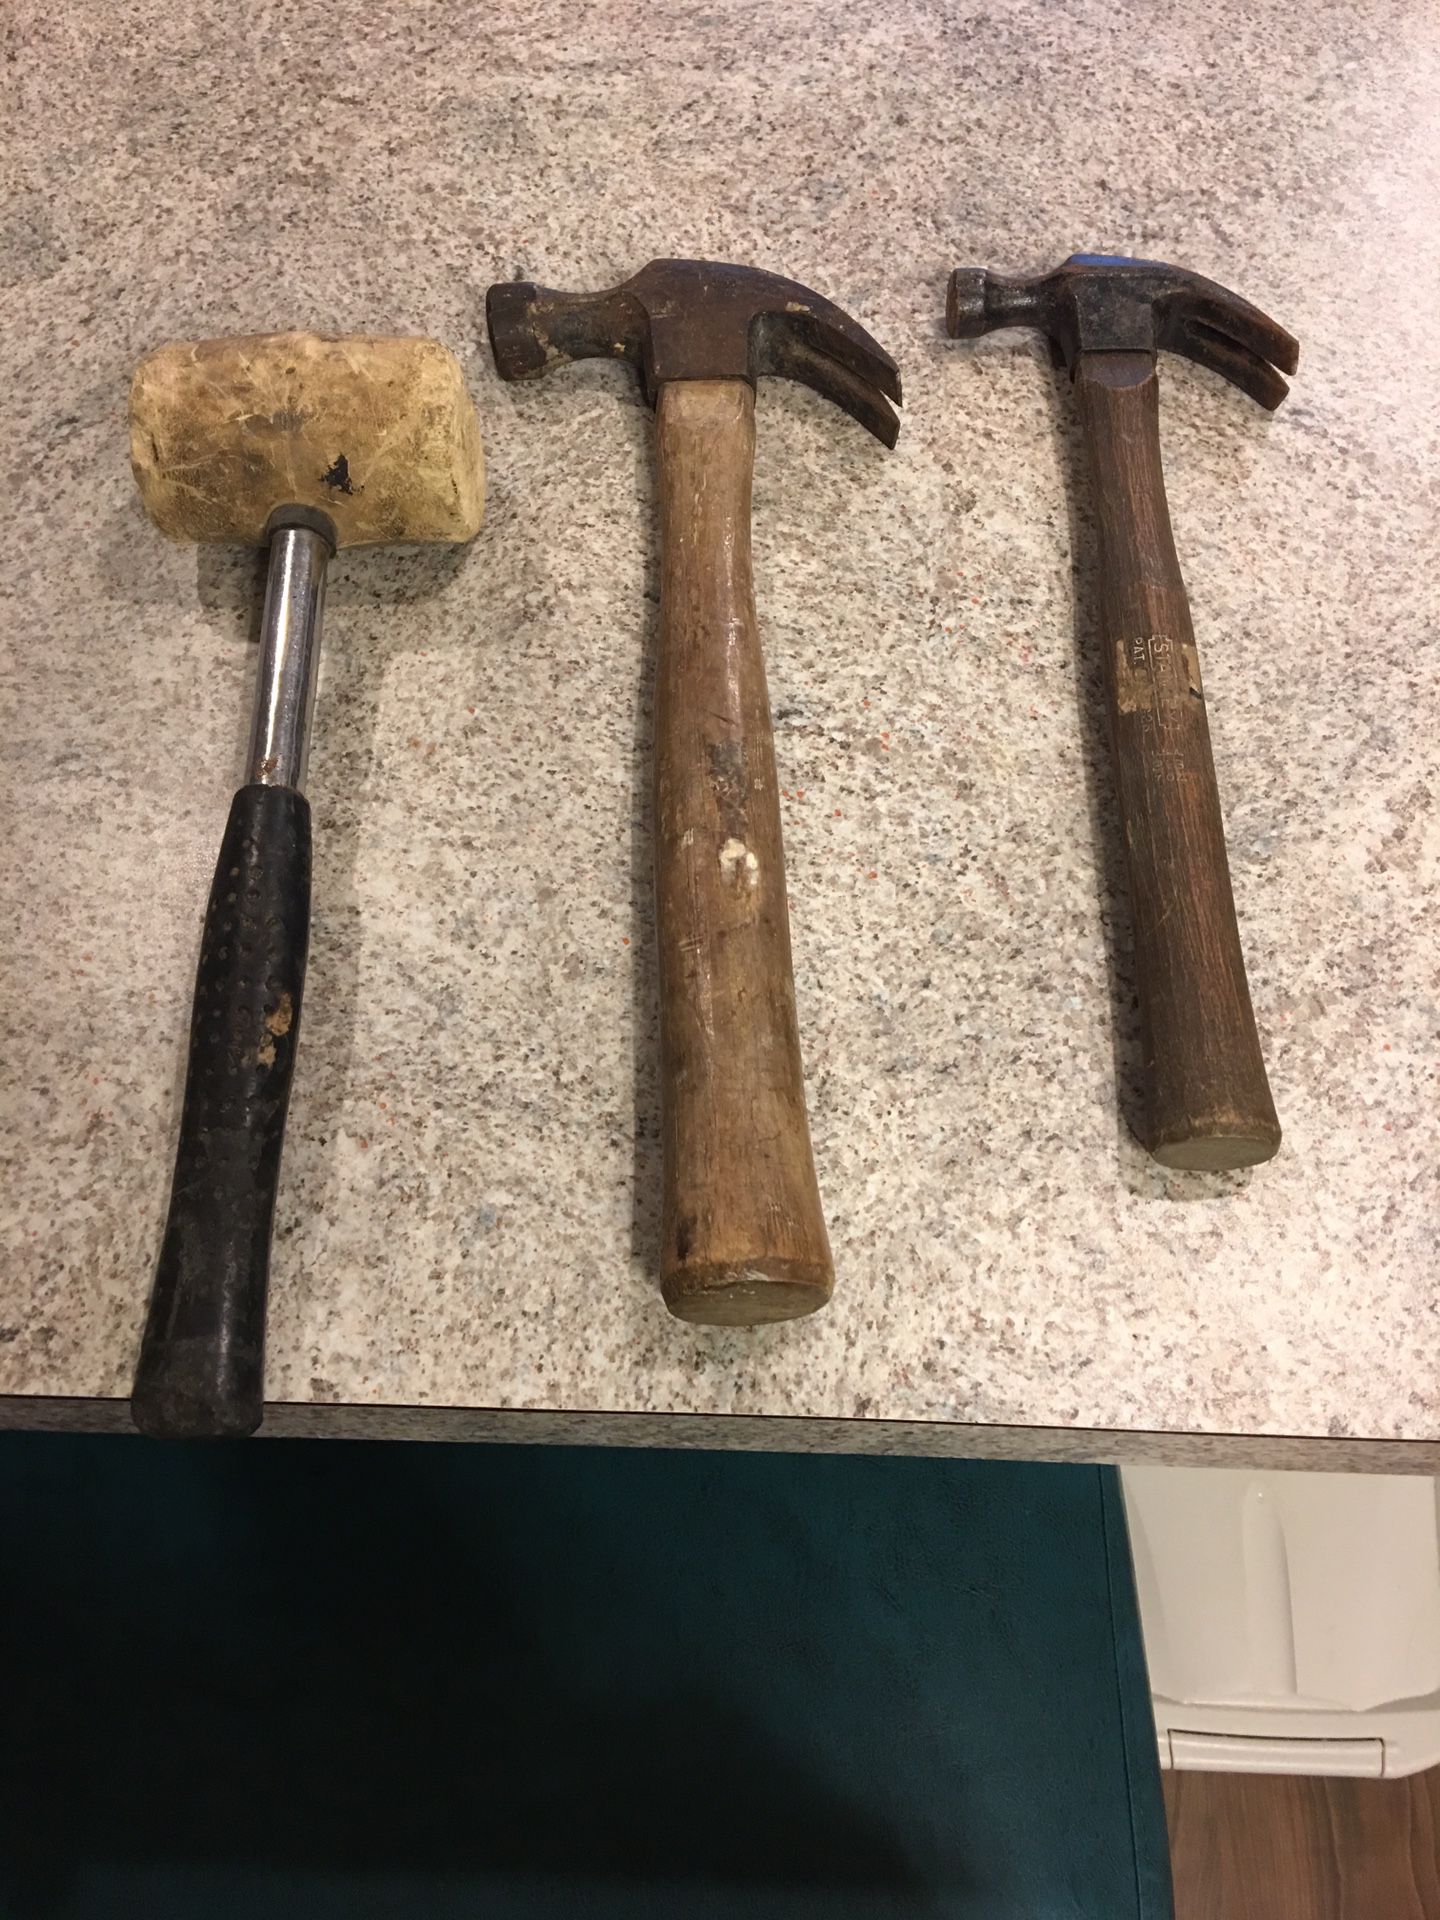 3 used hammers